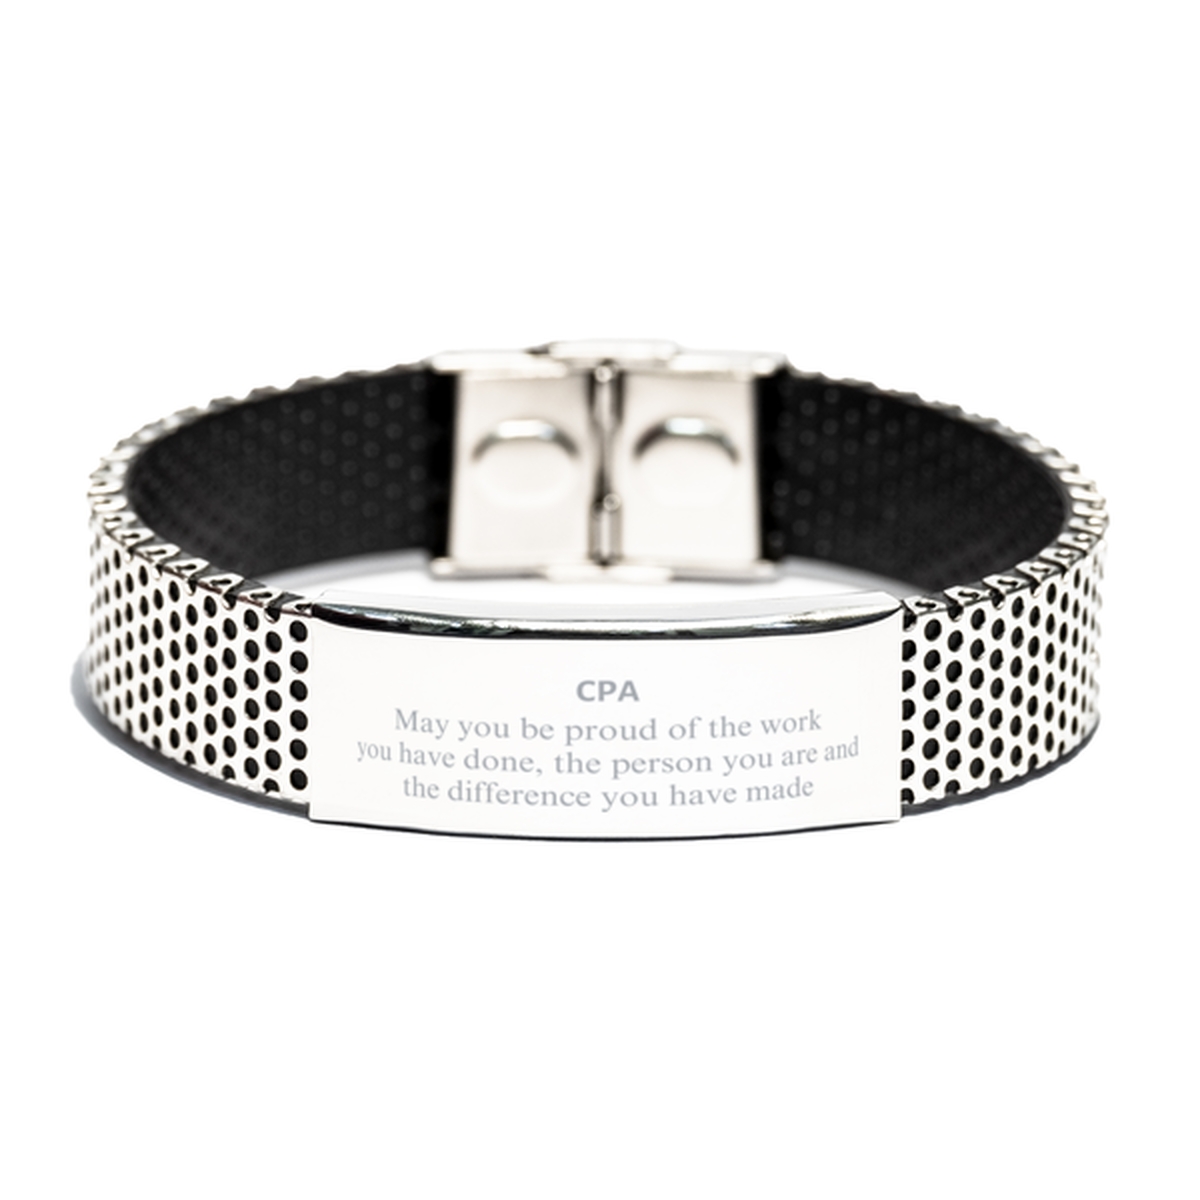 CPA May you be proud of the work you have done, Retirement CPA Stainless Steel Bracelet for Colleague Appreciation Gifts Amazing for CPA